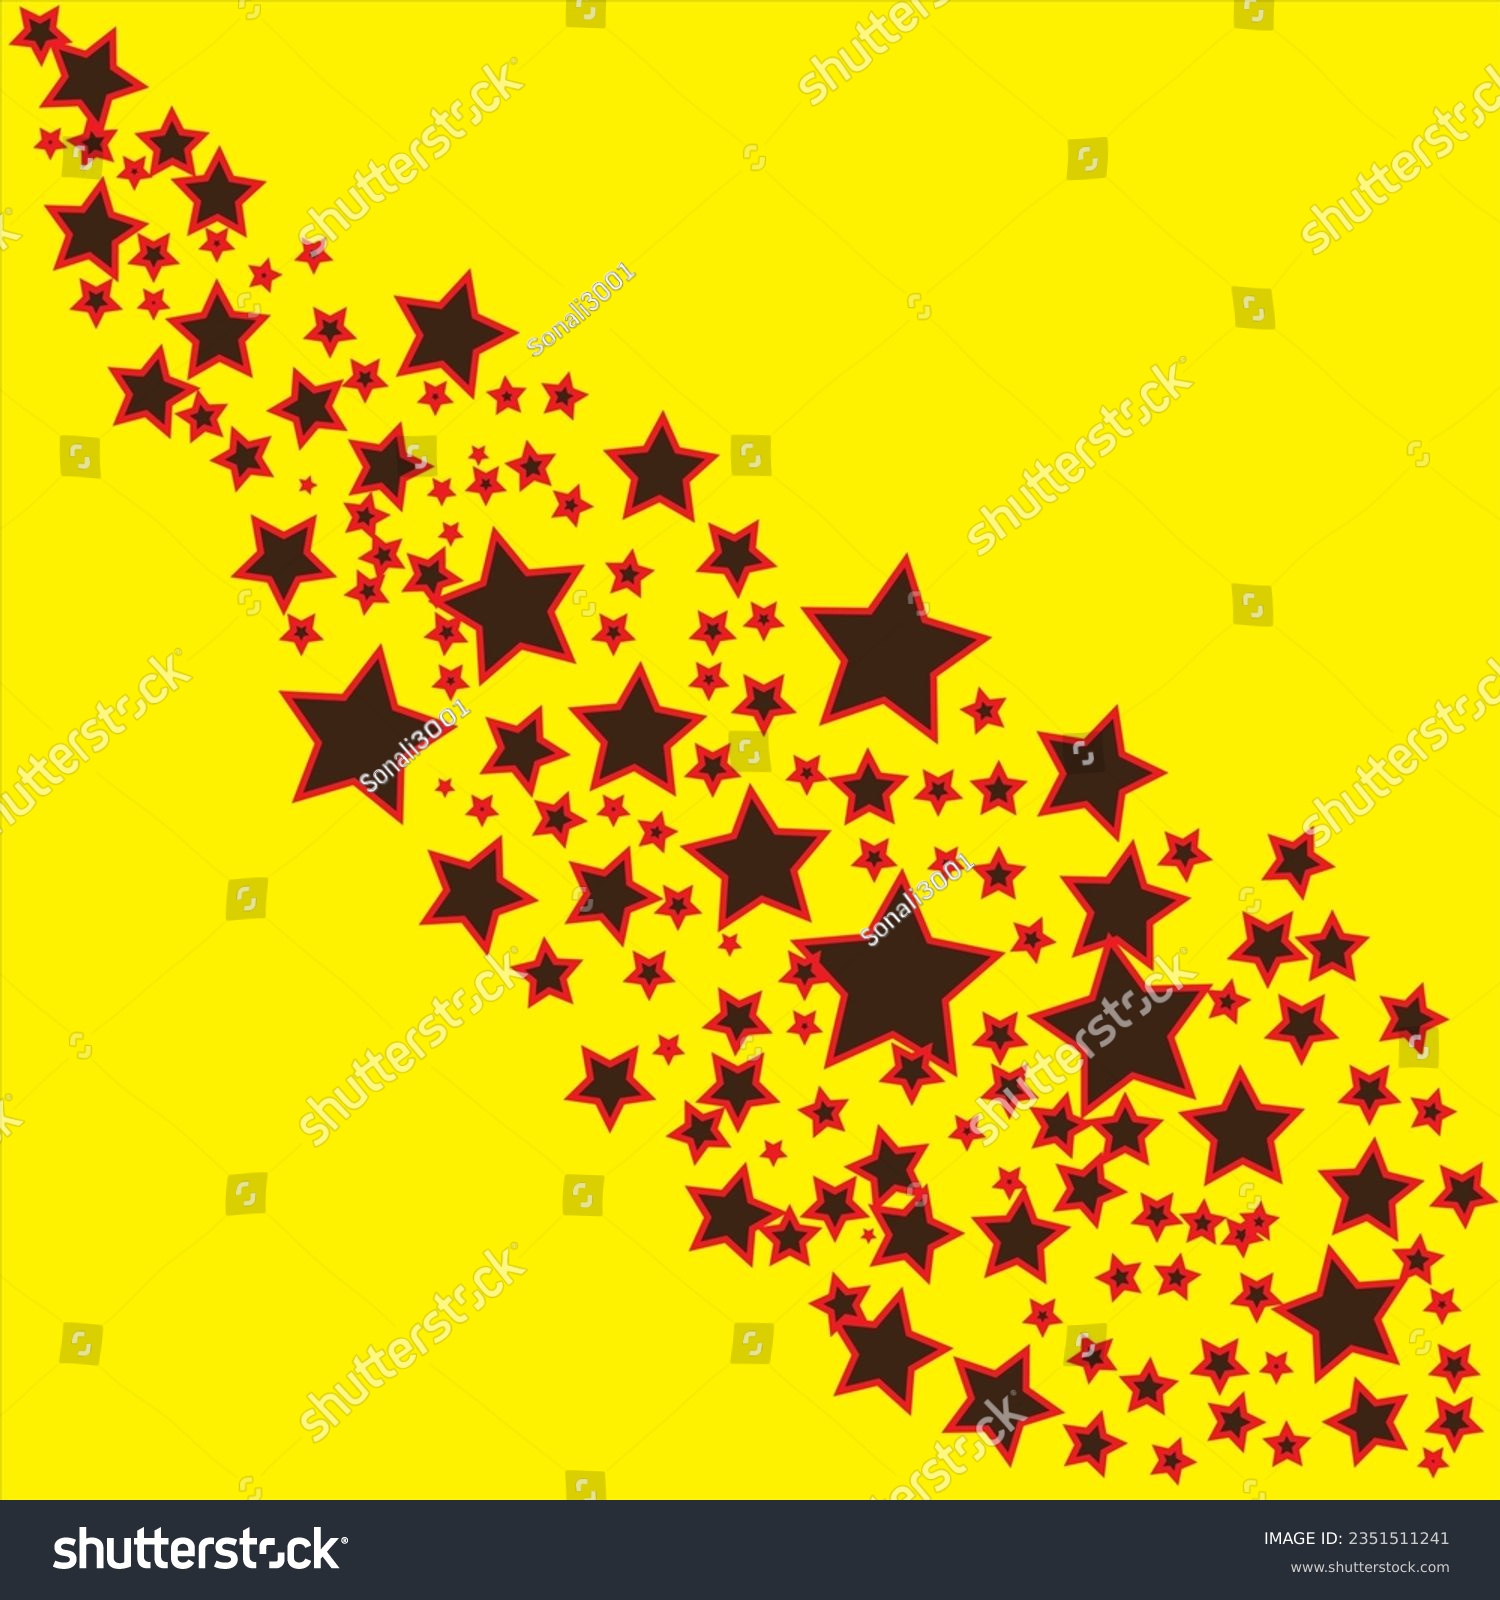 SVG of Star Vectors  Illustrations for Free Download | FreepikBlack stars icons .ai Royalty Free Stock SVG VectorBlack stars icons .ai Royalty Free Stock SVG VectorYellow Stars Vector Illustration Star Shap svg